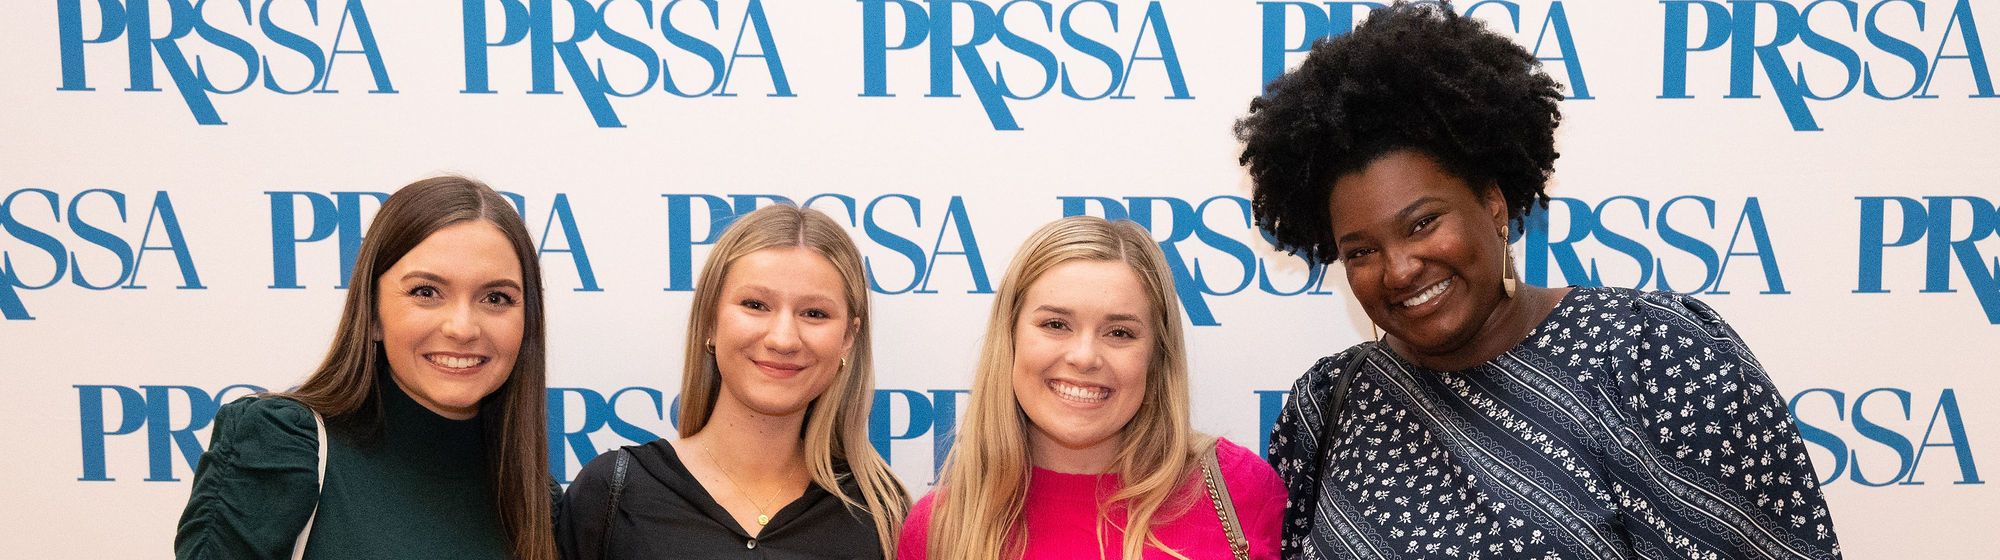 Four PRSSA student members in front of logo backdrop